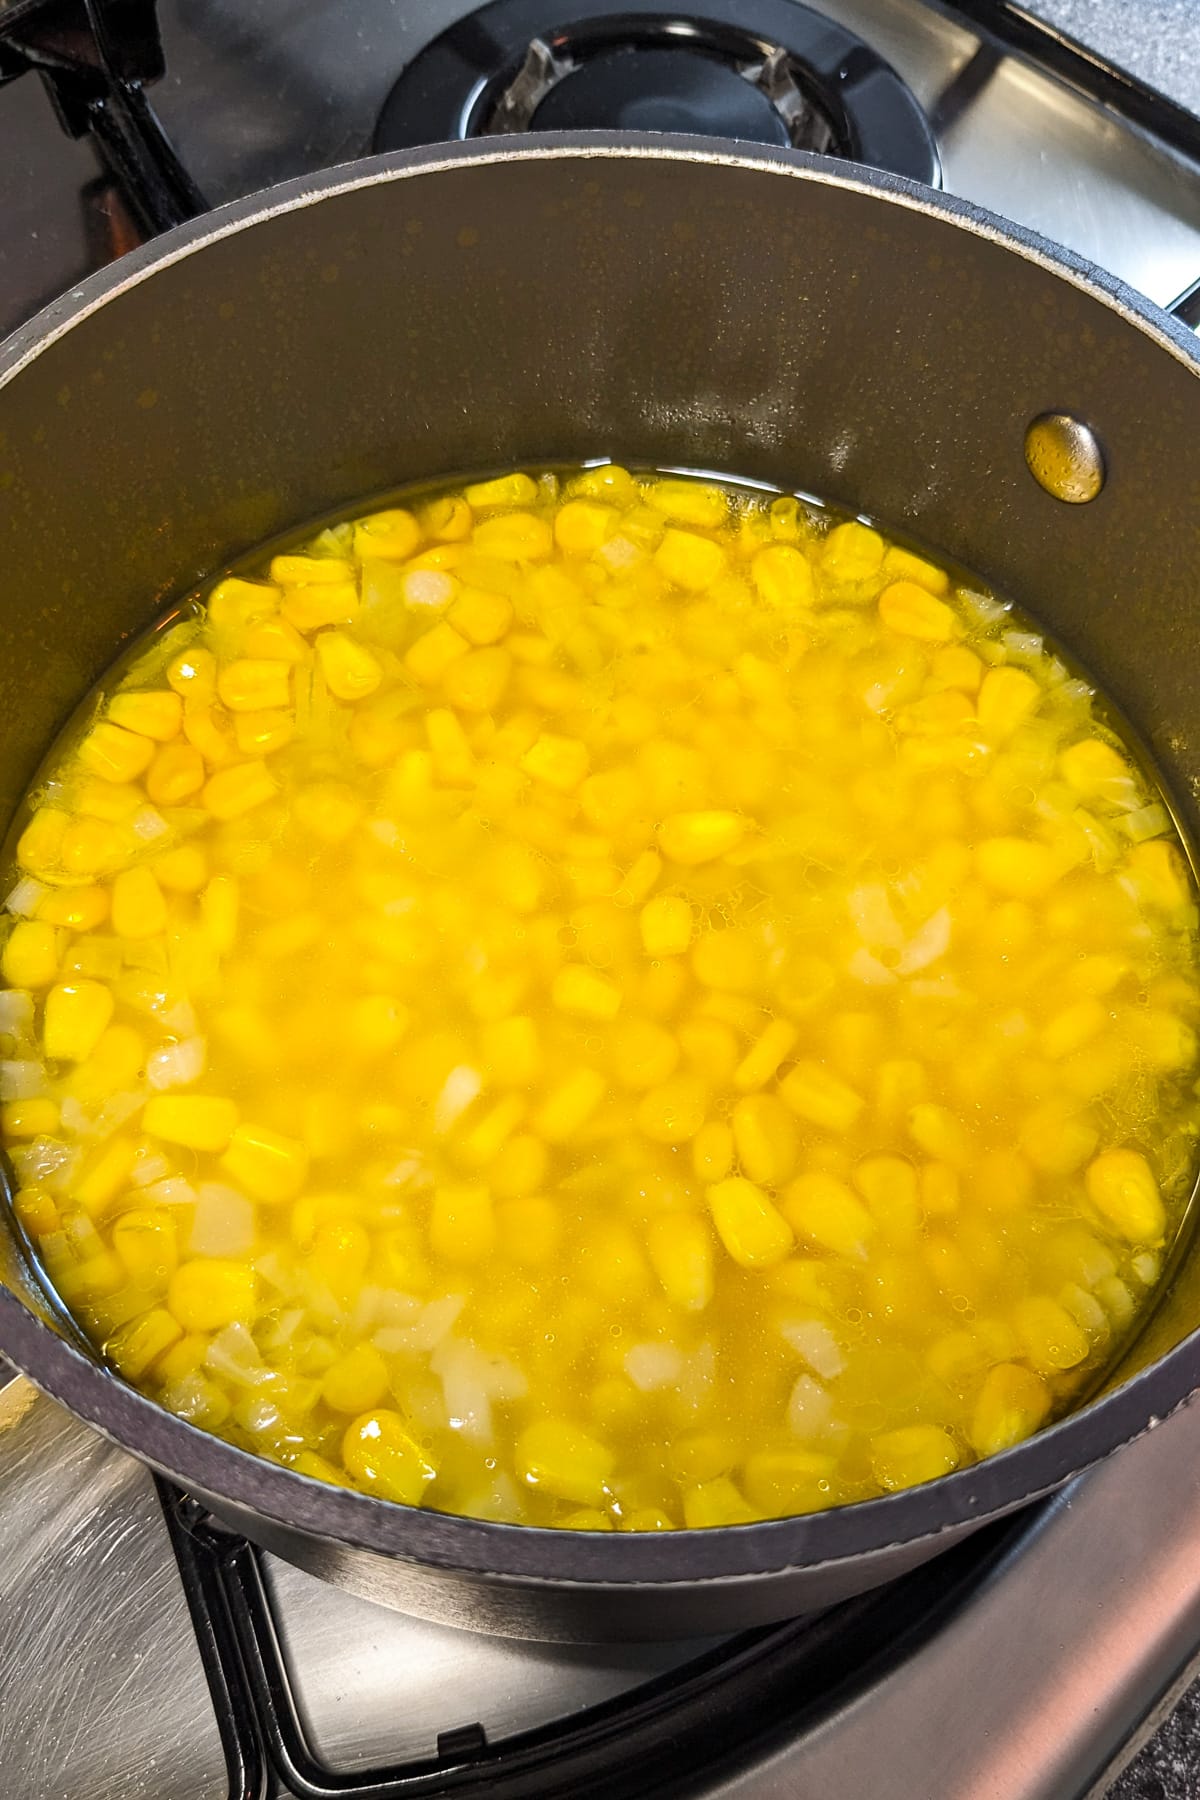 Cooked corn in water in a saucepan on the stove.